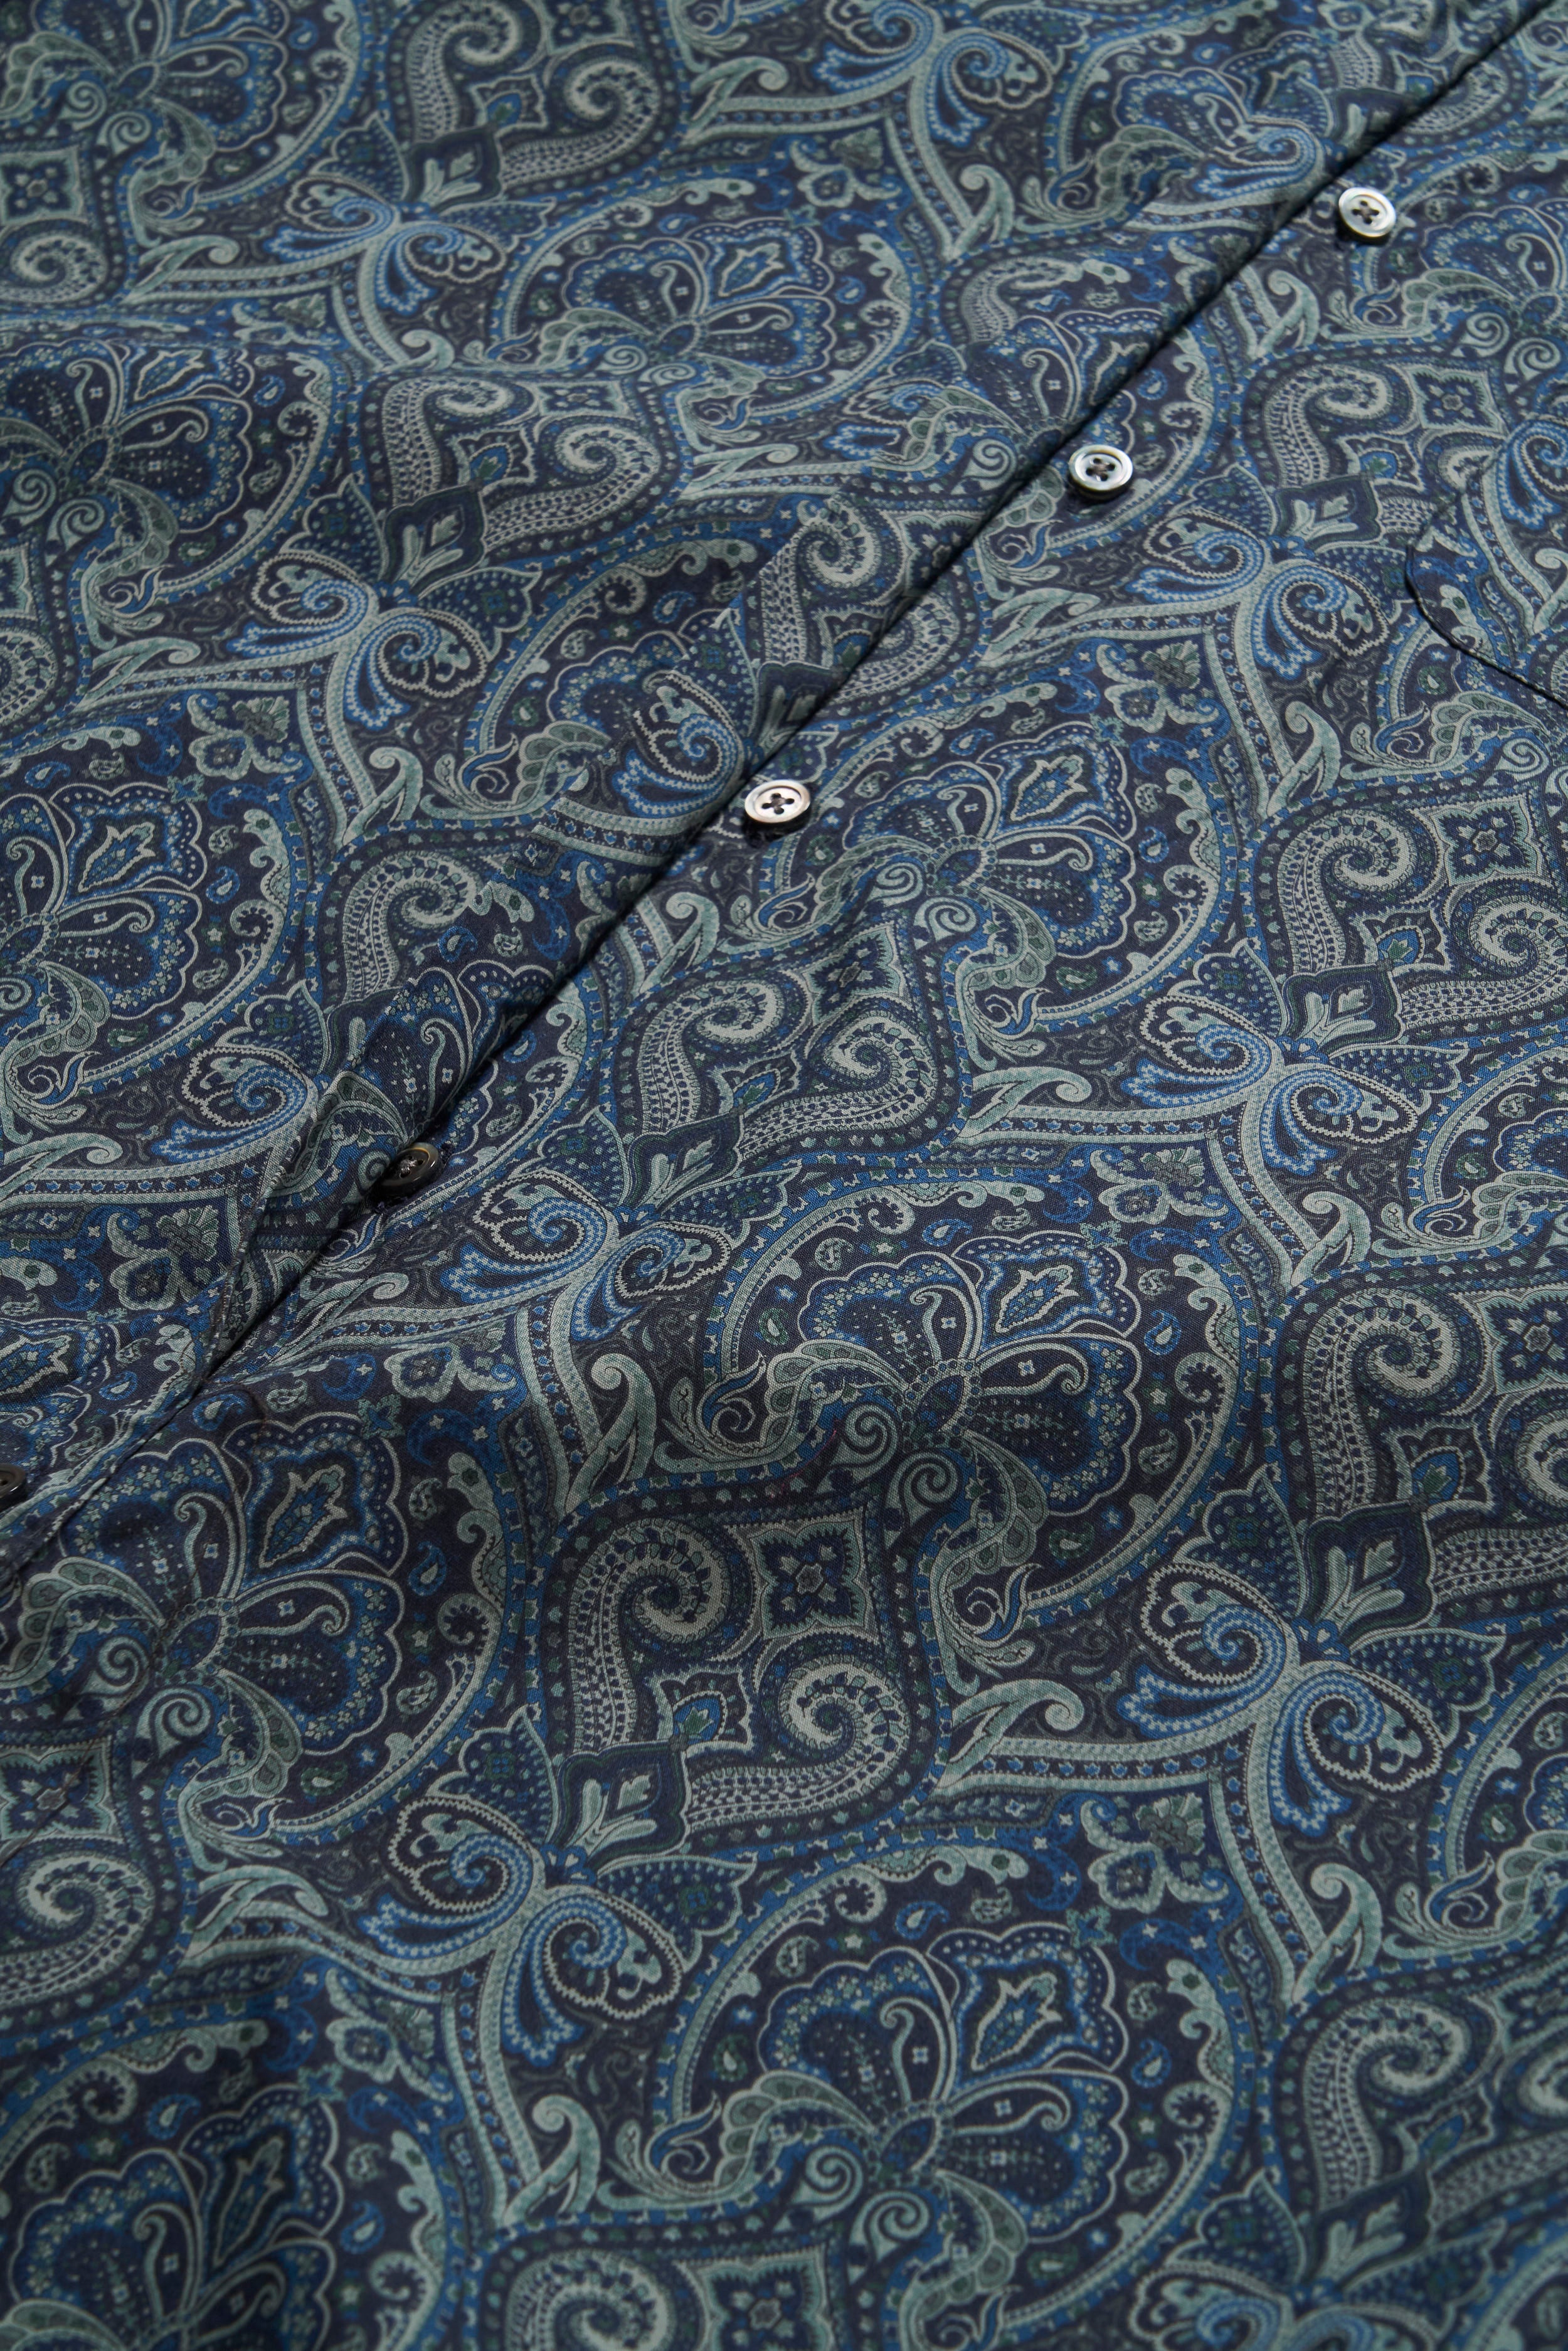 Engineered Garments Rounded Collar Shirt - Navy Cotton Paisley Print